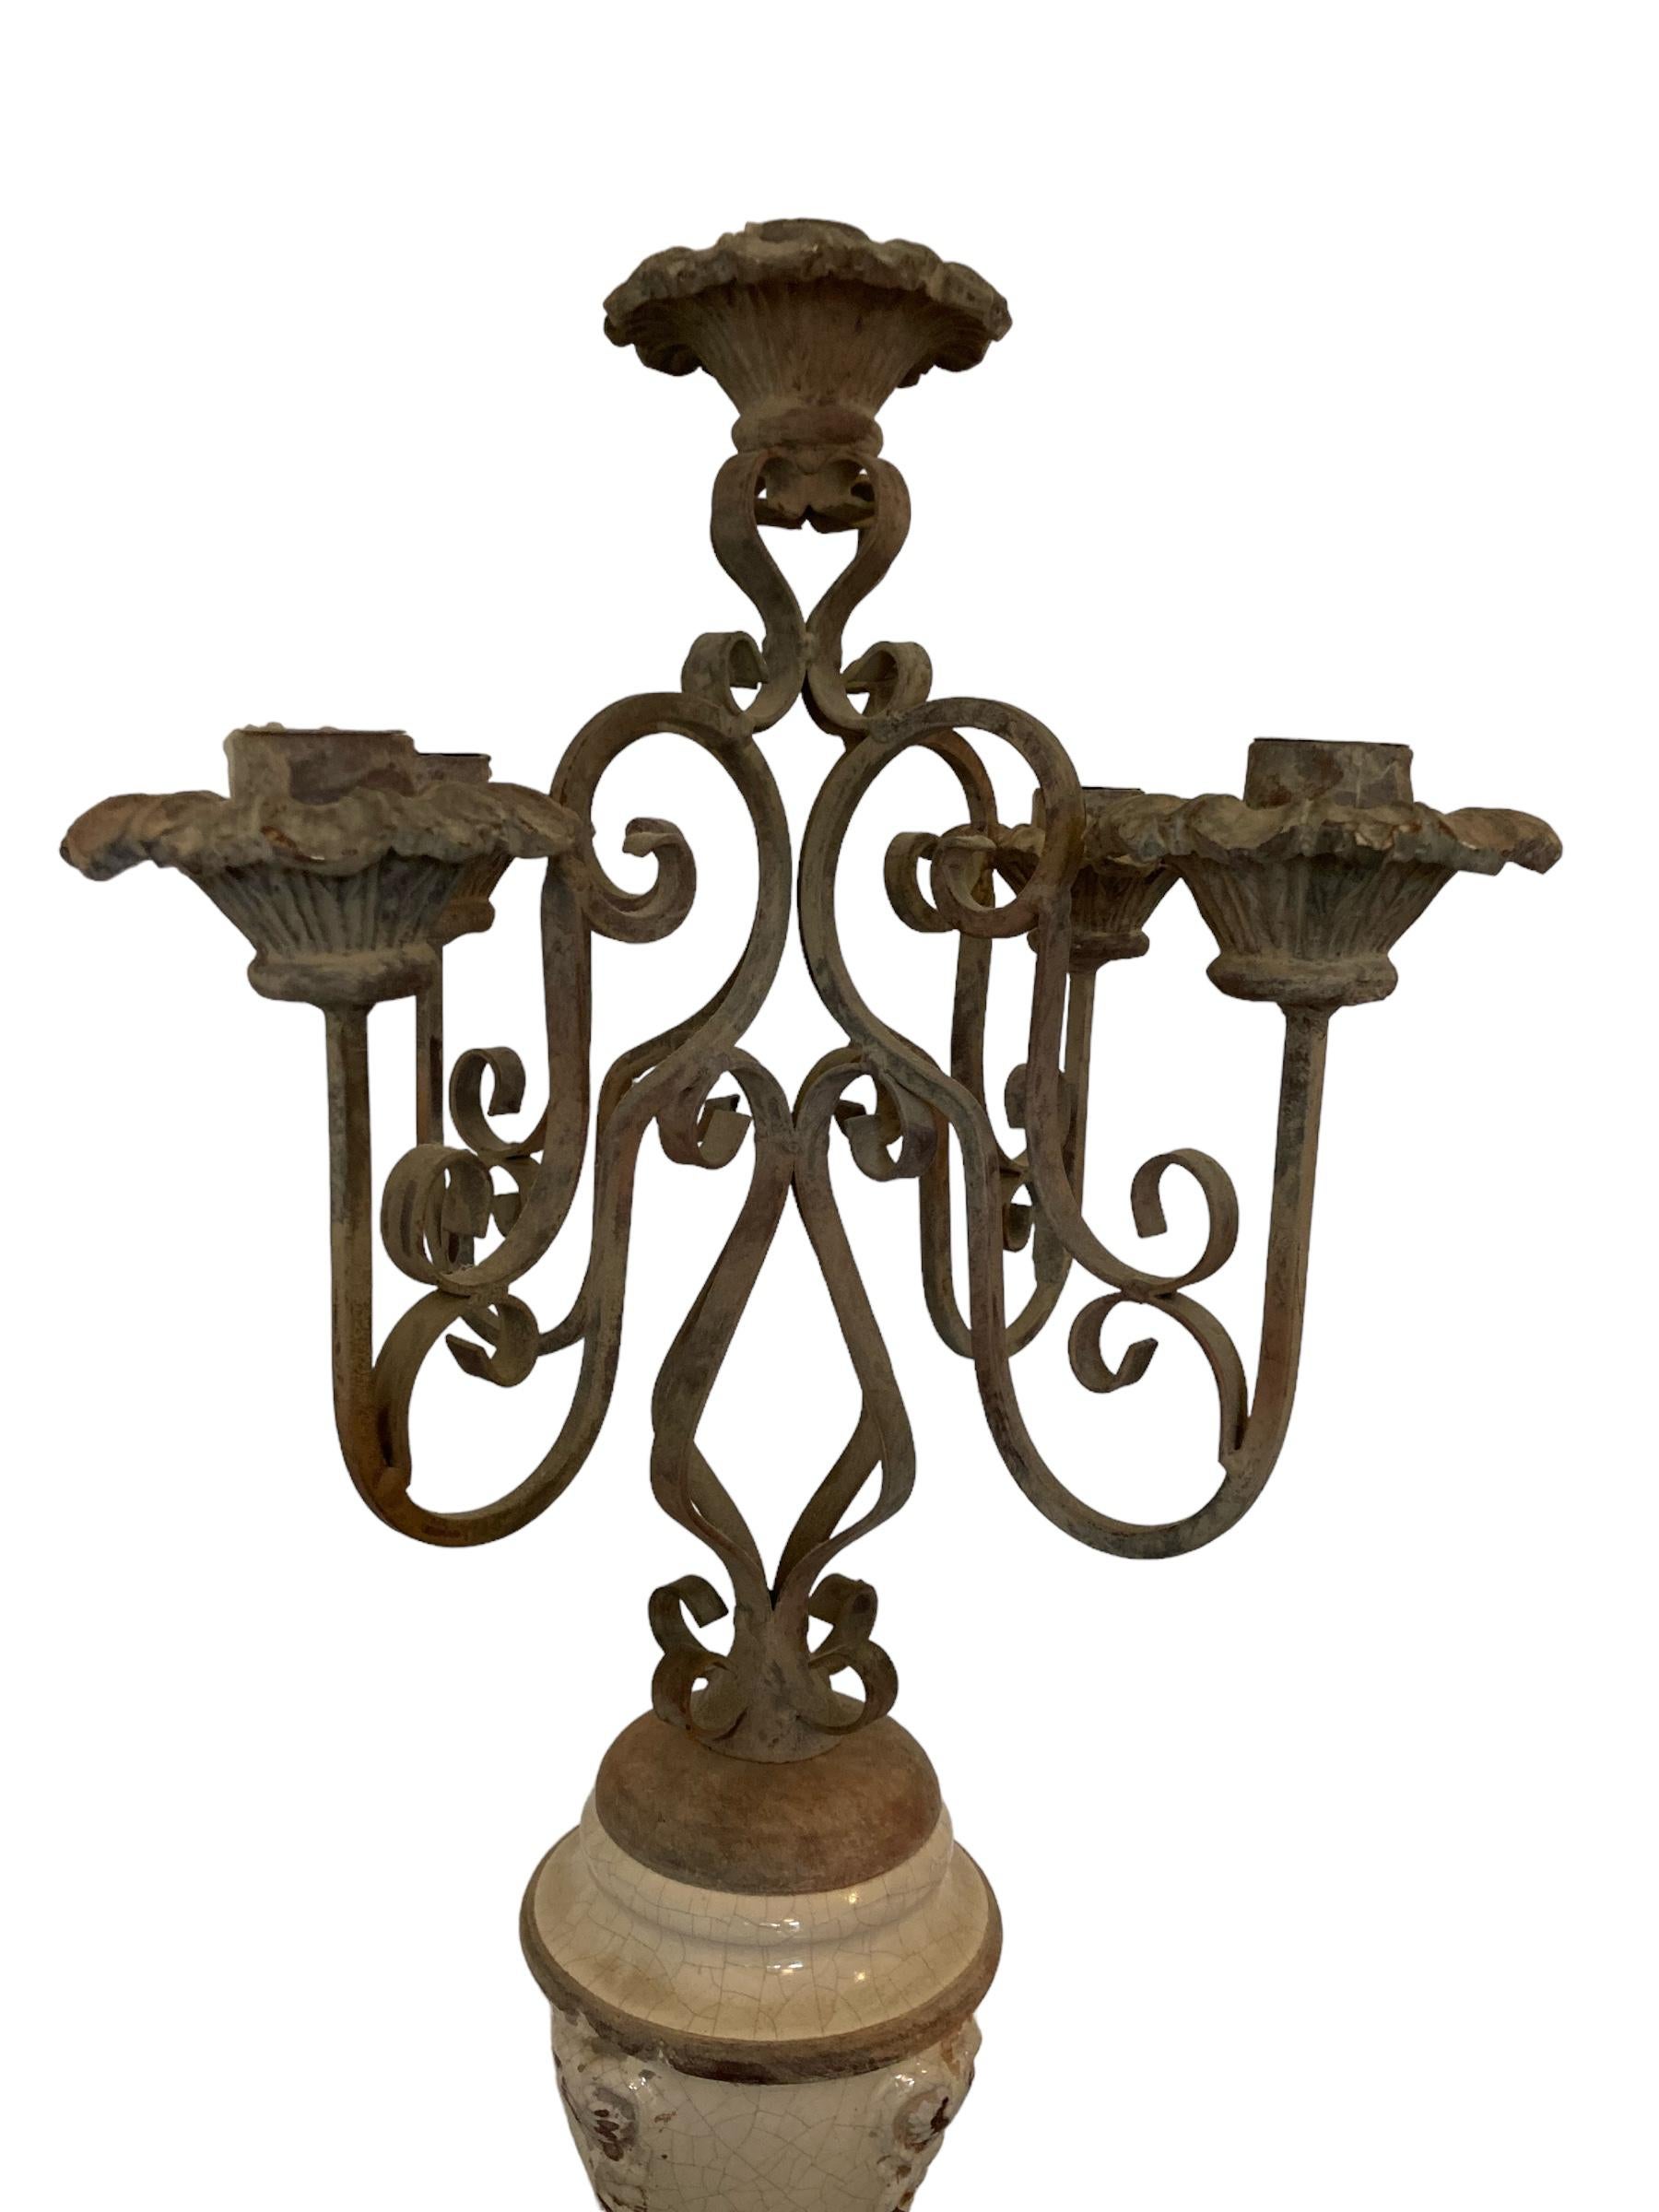 Gothic Style Five candle candelabra wrought iron with ceramic base from Germany.
This elegant candelabra features a beautifully designed ceramic base that adds a touch of sophistication to any room. Crafted with attention to detail, this decorative